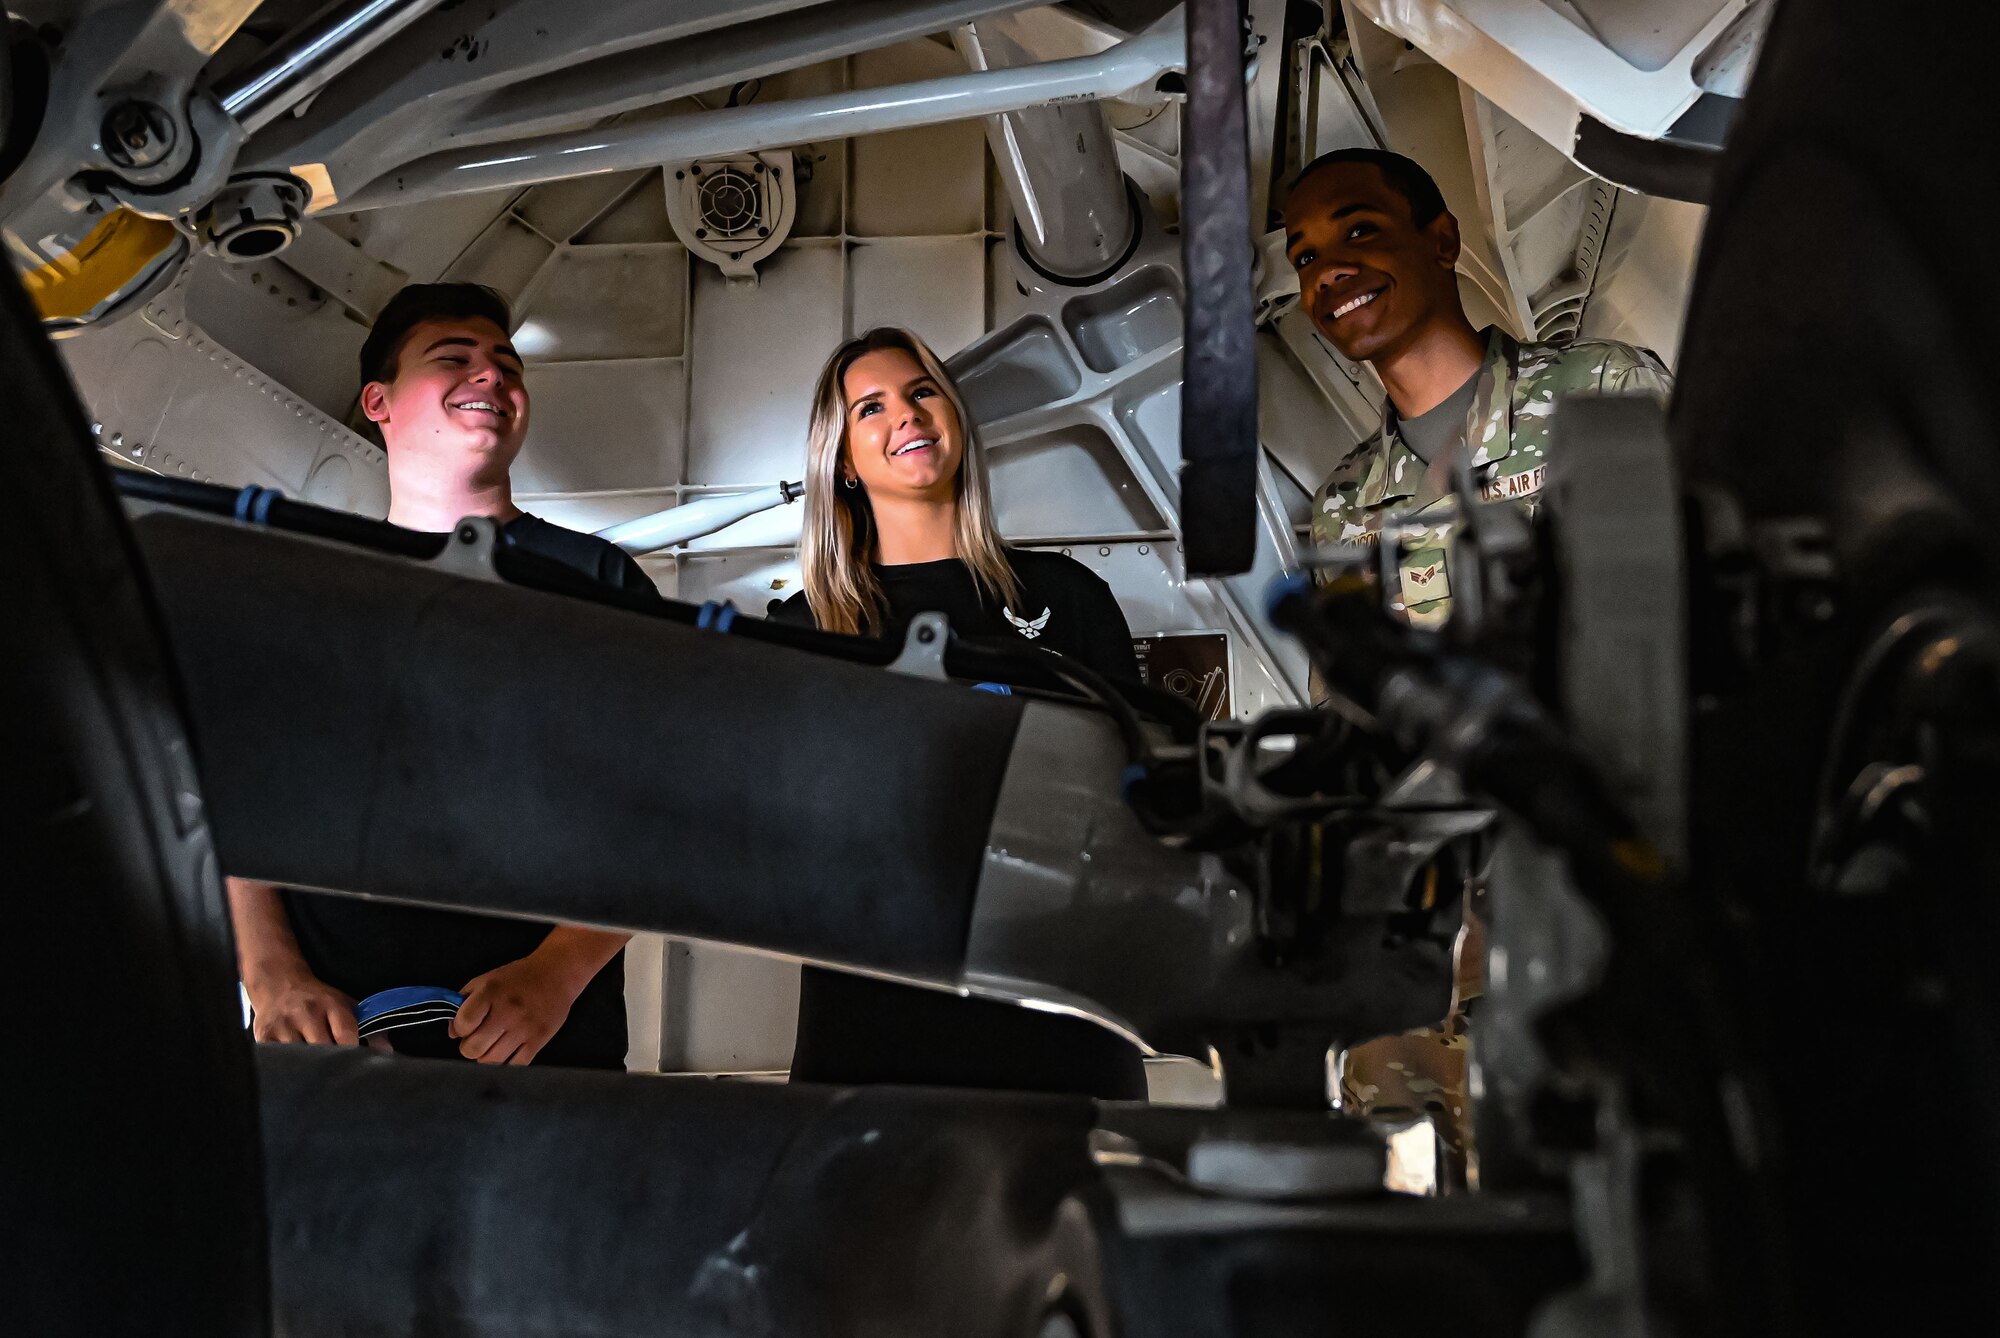 U.S. Air Force Airman First Class Gabriel Johnson, 305th Aircraft Maintenance Squadron, guides Formula Drift drivers Amanda and Branden Sorensen through the wheel well of a C-17 Globemaster III aircraft during a tour at Joint Base McGuire-Dix-Lakehurst on June 7, 2022. Drift team duo Branden and Amanda Sorensen visited JB MDL to interact with Airmen and learn about different Air Force career fields. Air Force Recruiting Service recently continued their 13-year partnership with the Formula Drift series. Throughout the 2022 Formula Drift circuit, the Air Force will serve as the primary sponsor for the Sorensen Motorsports team.